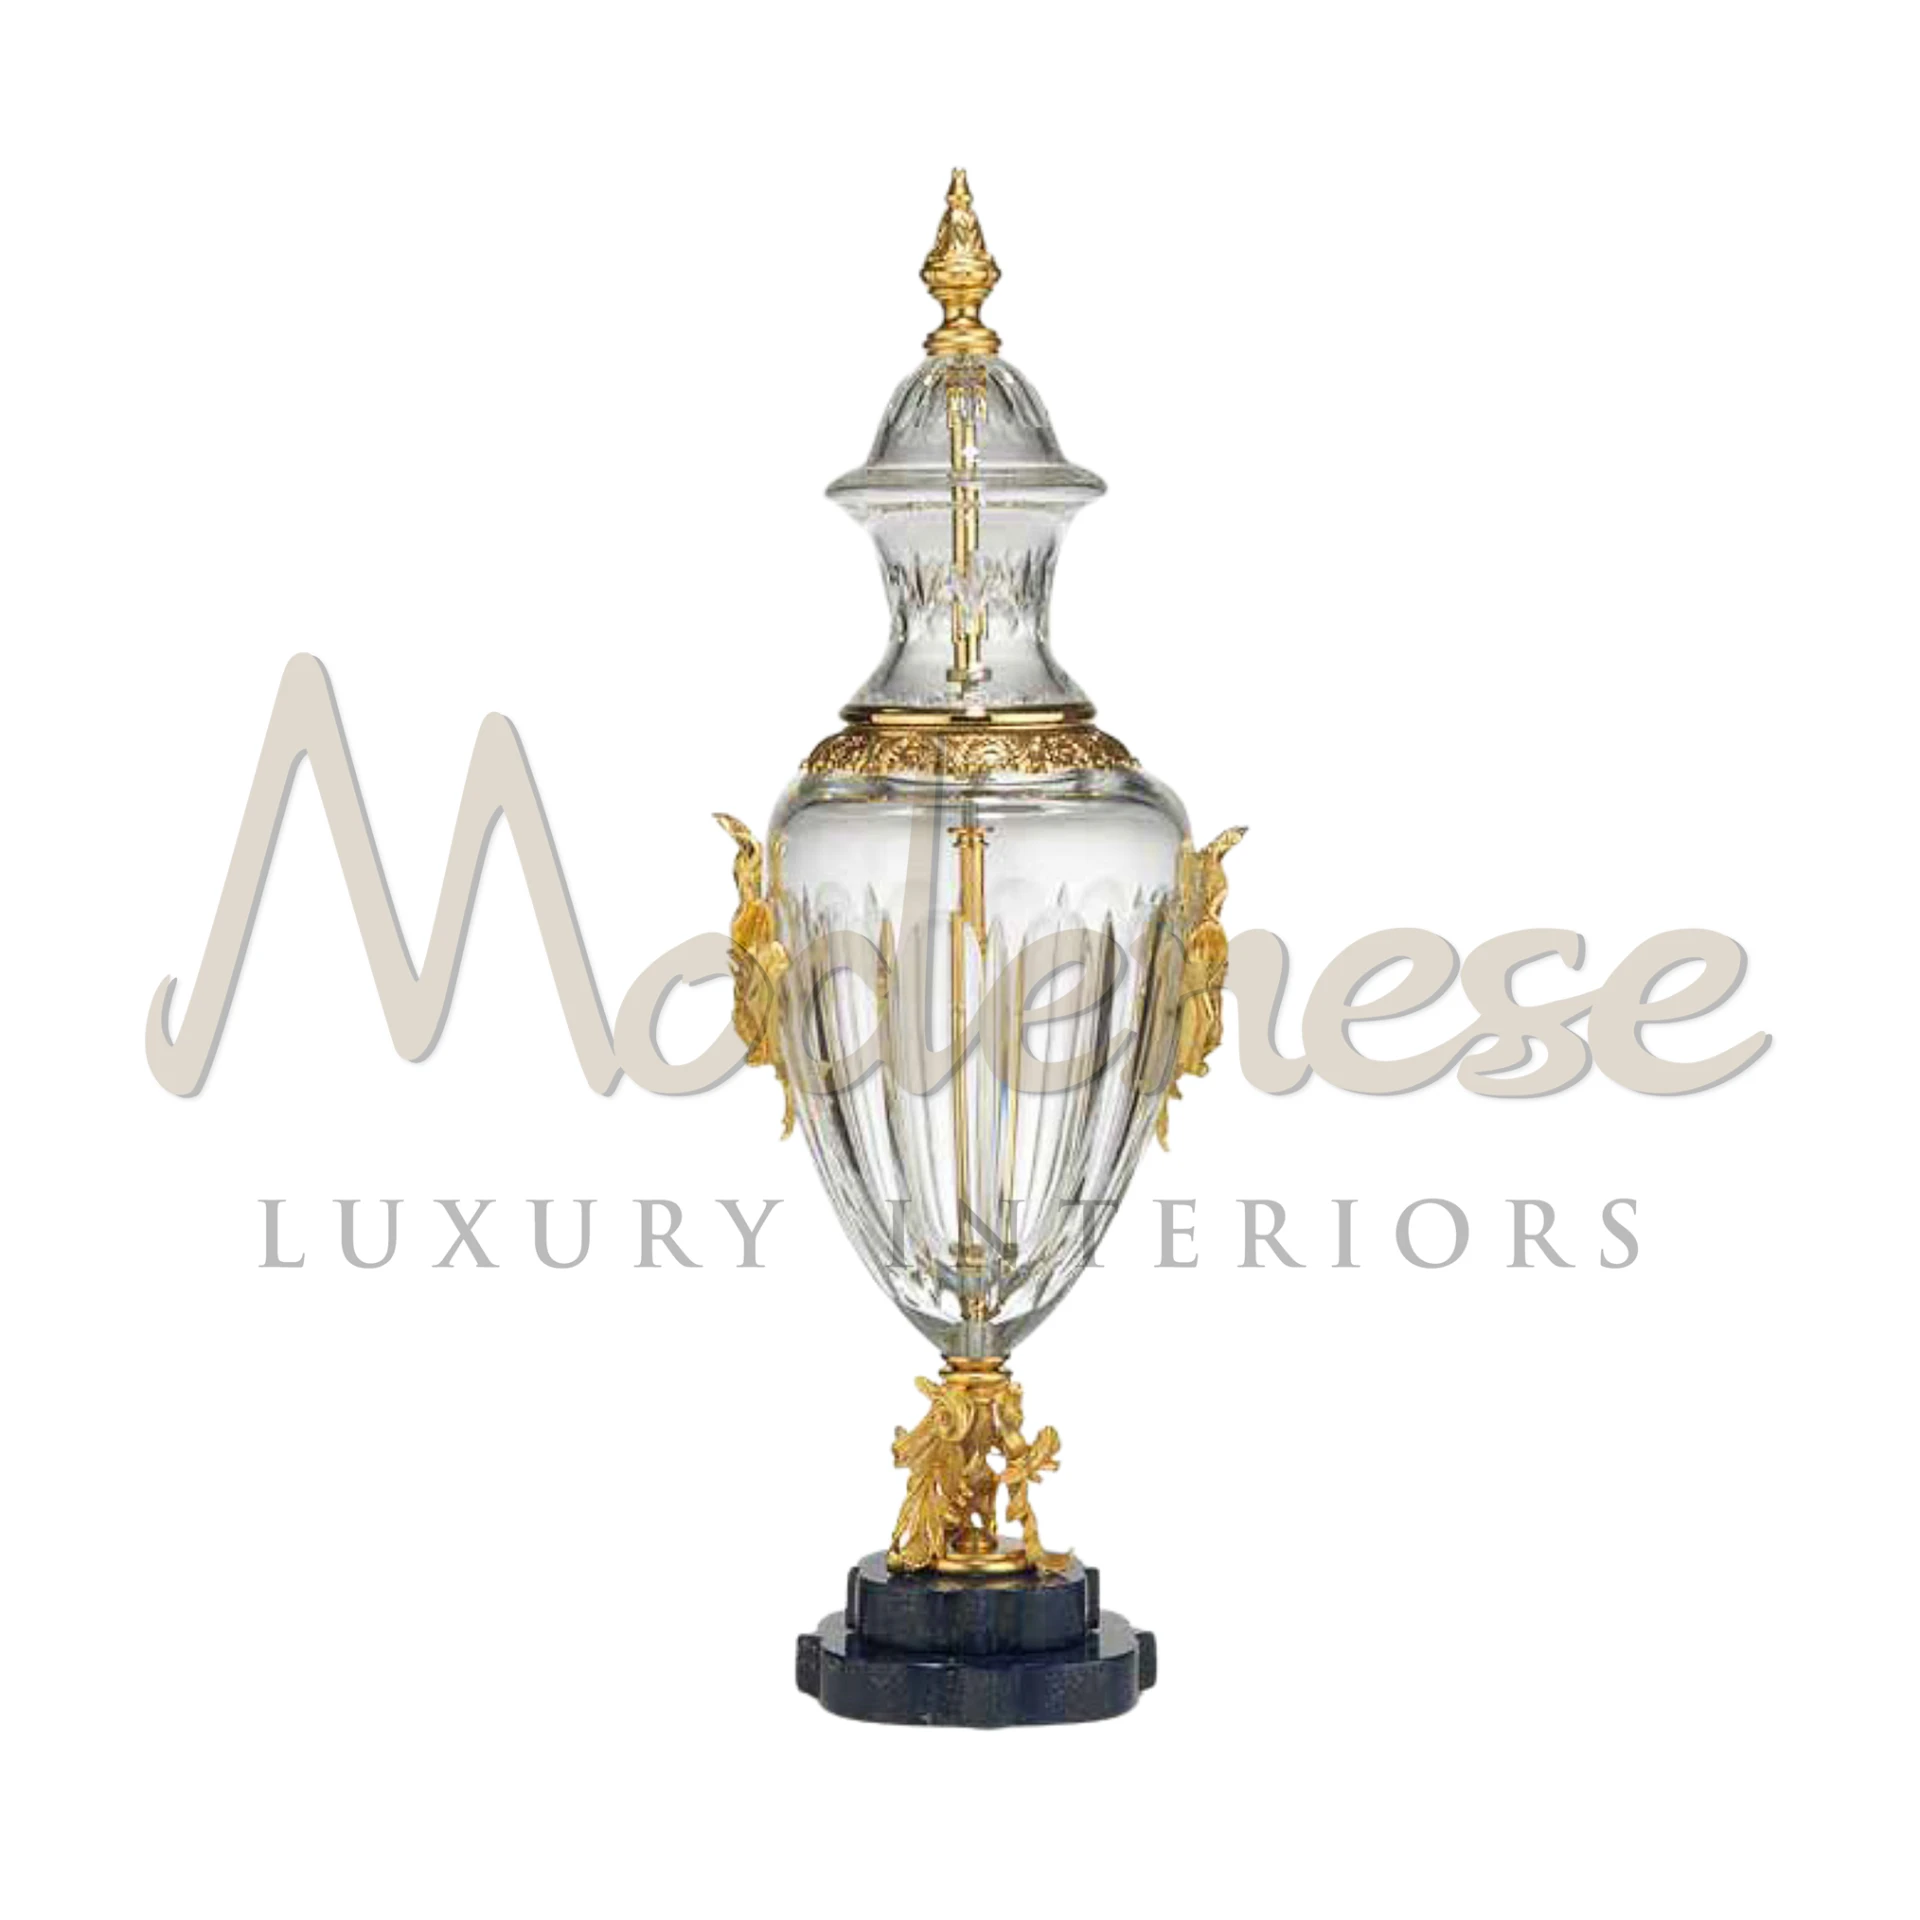 Elegant Victorian vase with gold details and floral motifs, perfect for adding classic and baroque luxury to any interior design.






